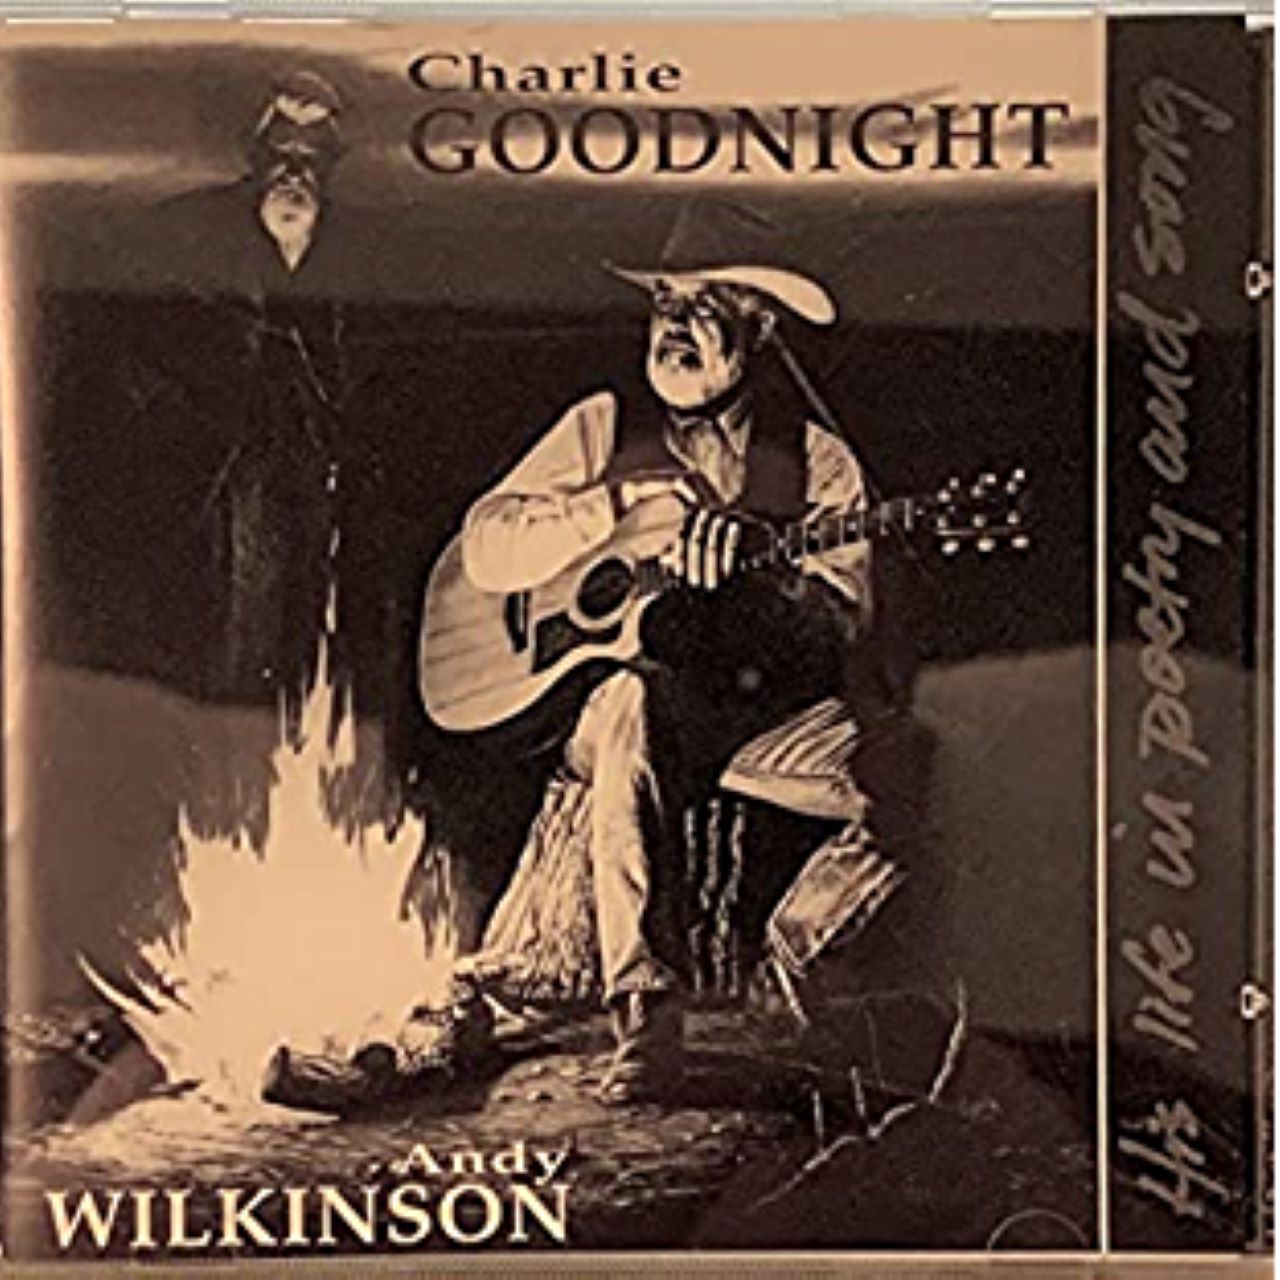 Andy Wilkinson - Charlie Goodnight cover album